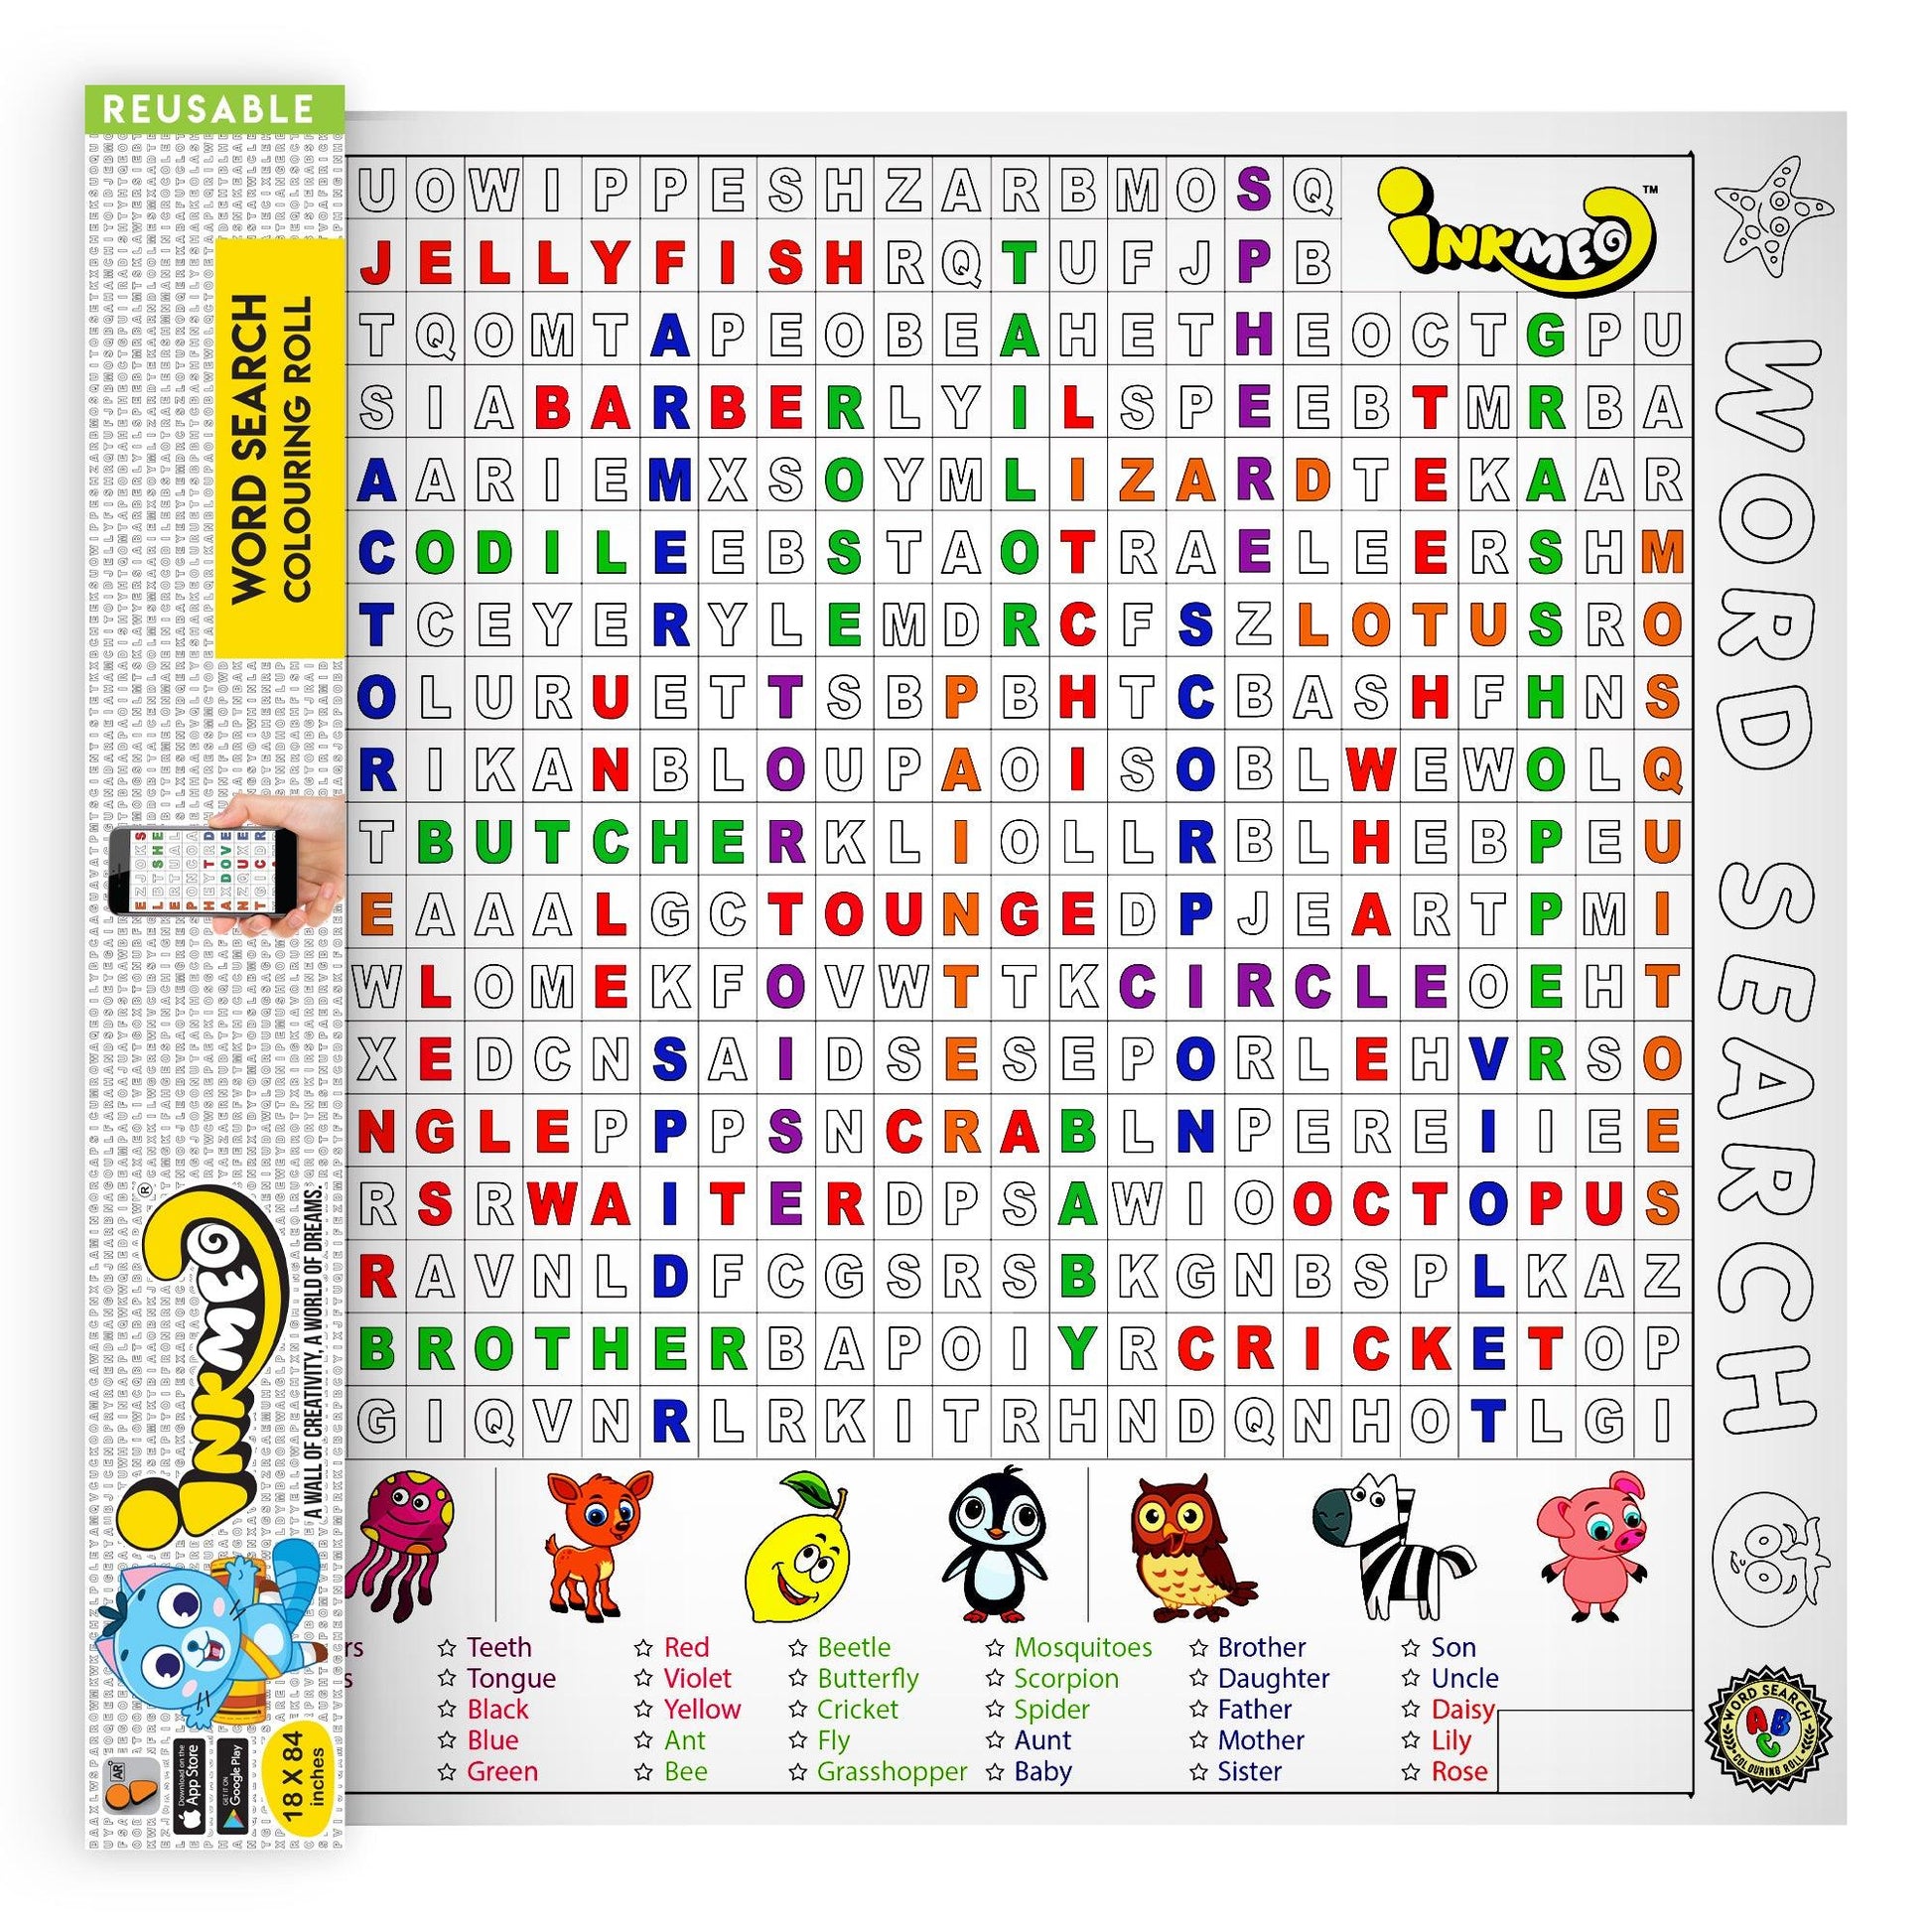 The image depicts a yellow box with an open roll, displaying words arranged in rows like puzzles alongside a colorful picture.